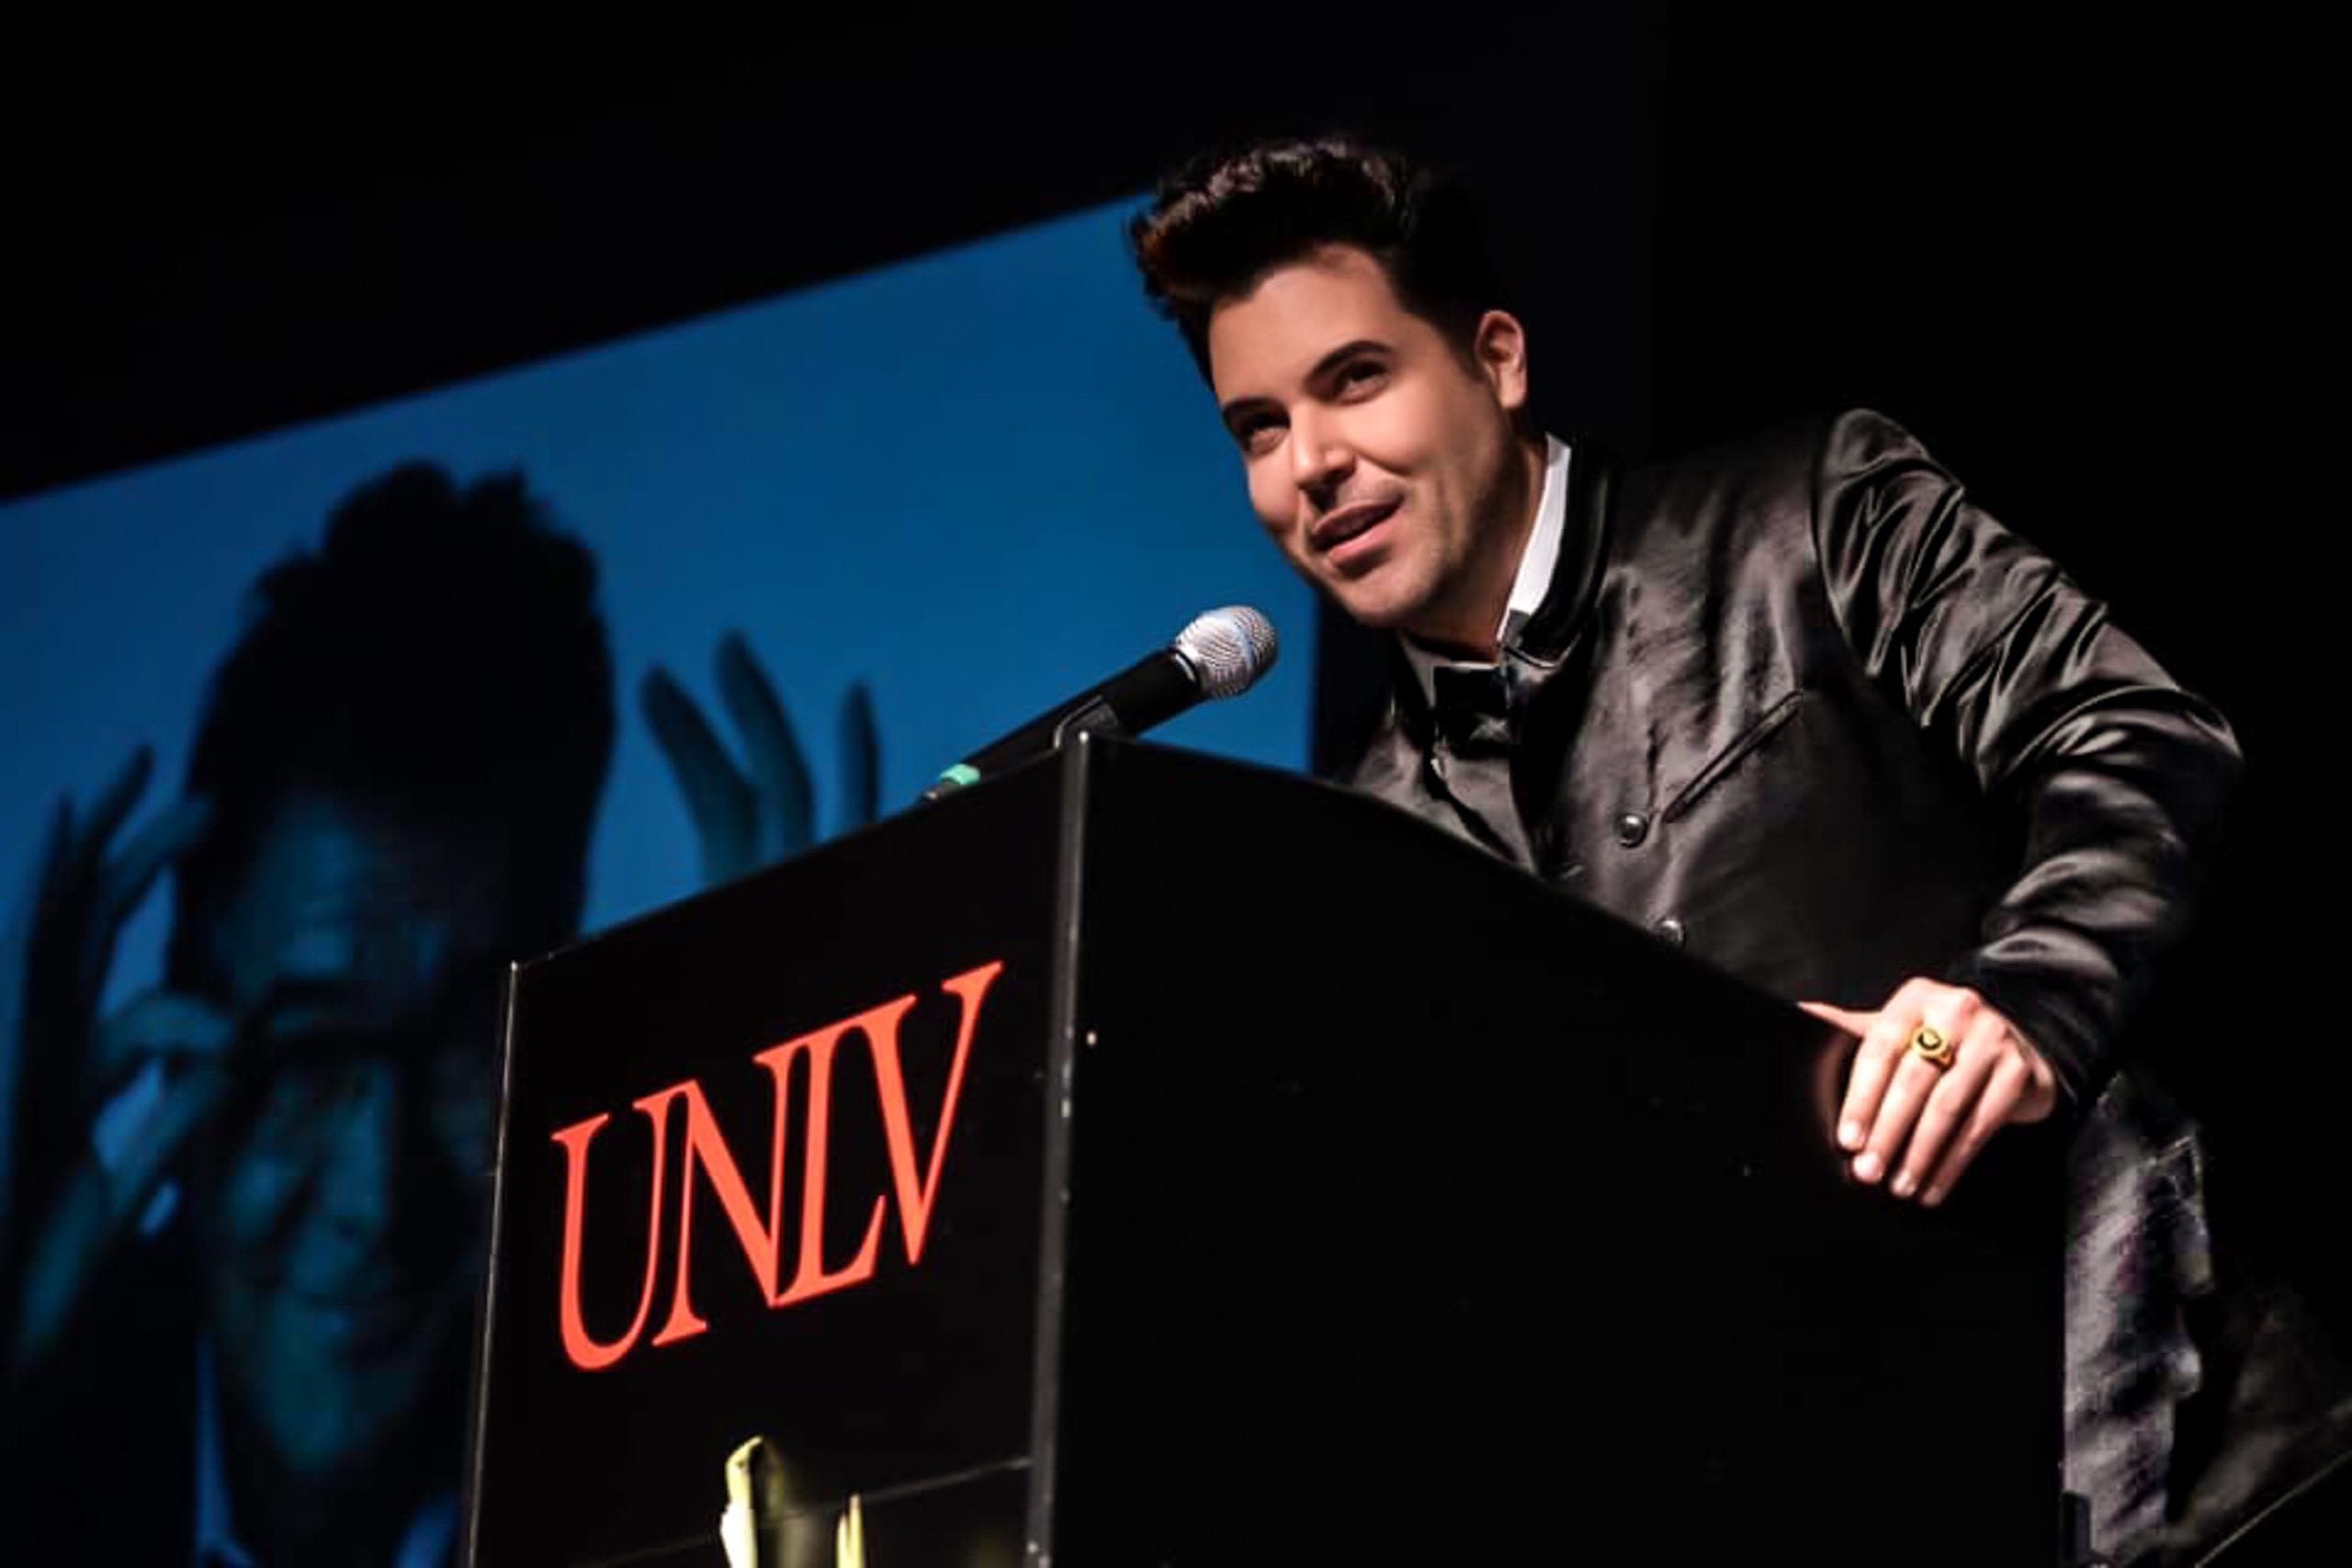 MORENO IS INDUCTED INTO THE UNLV HALL OF FAME